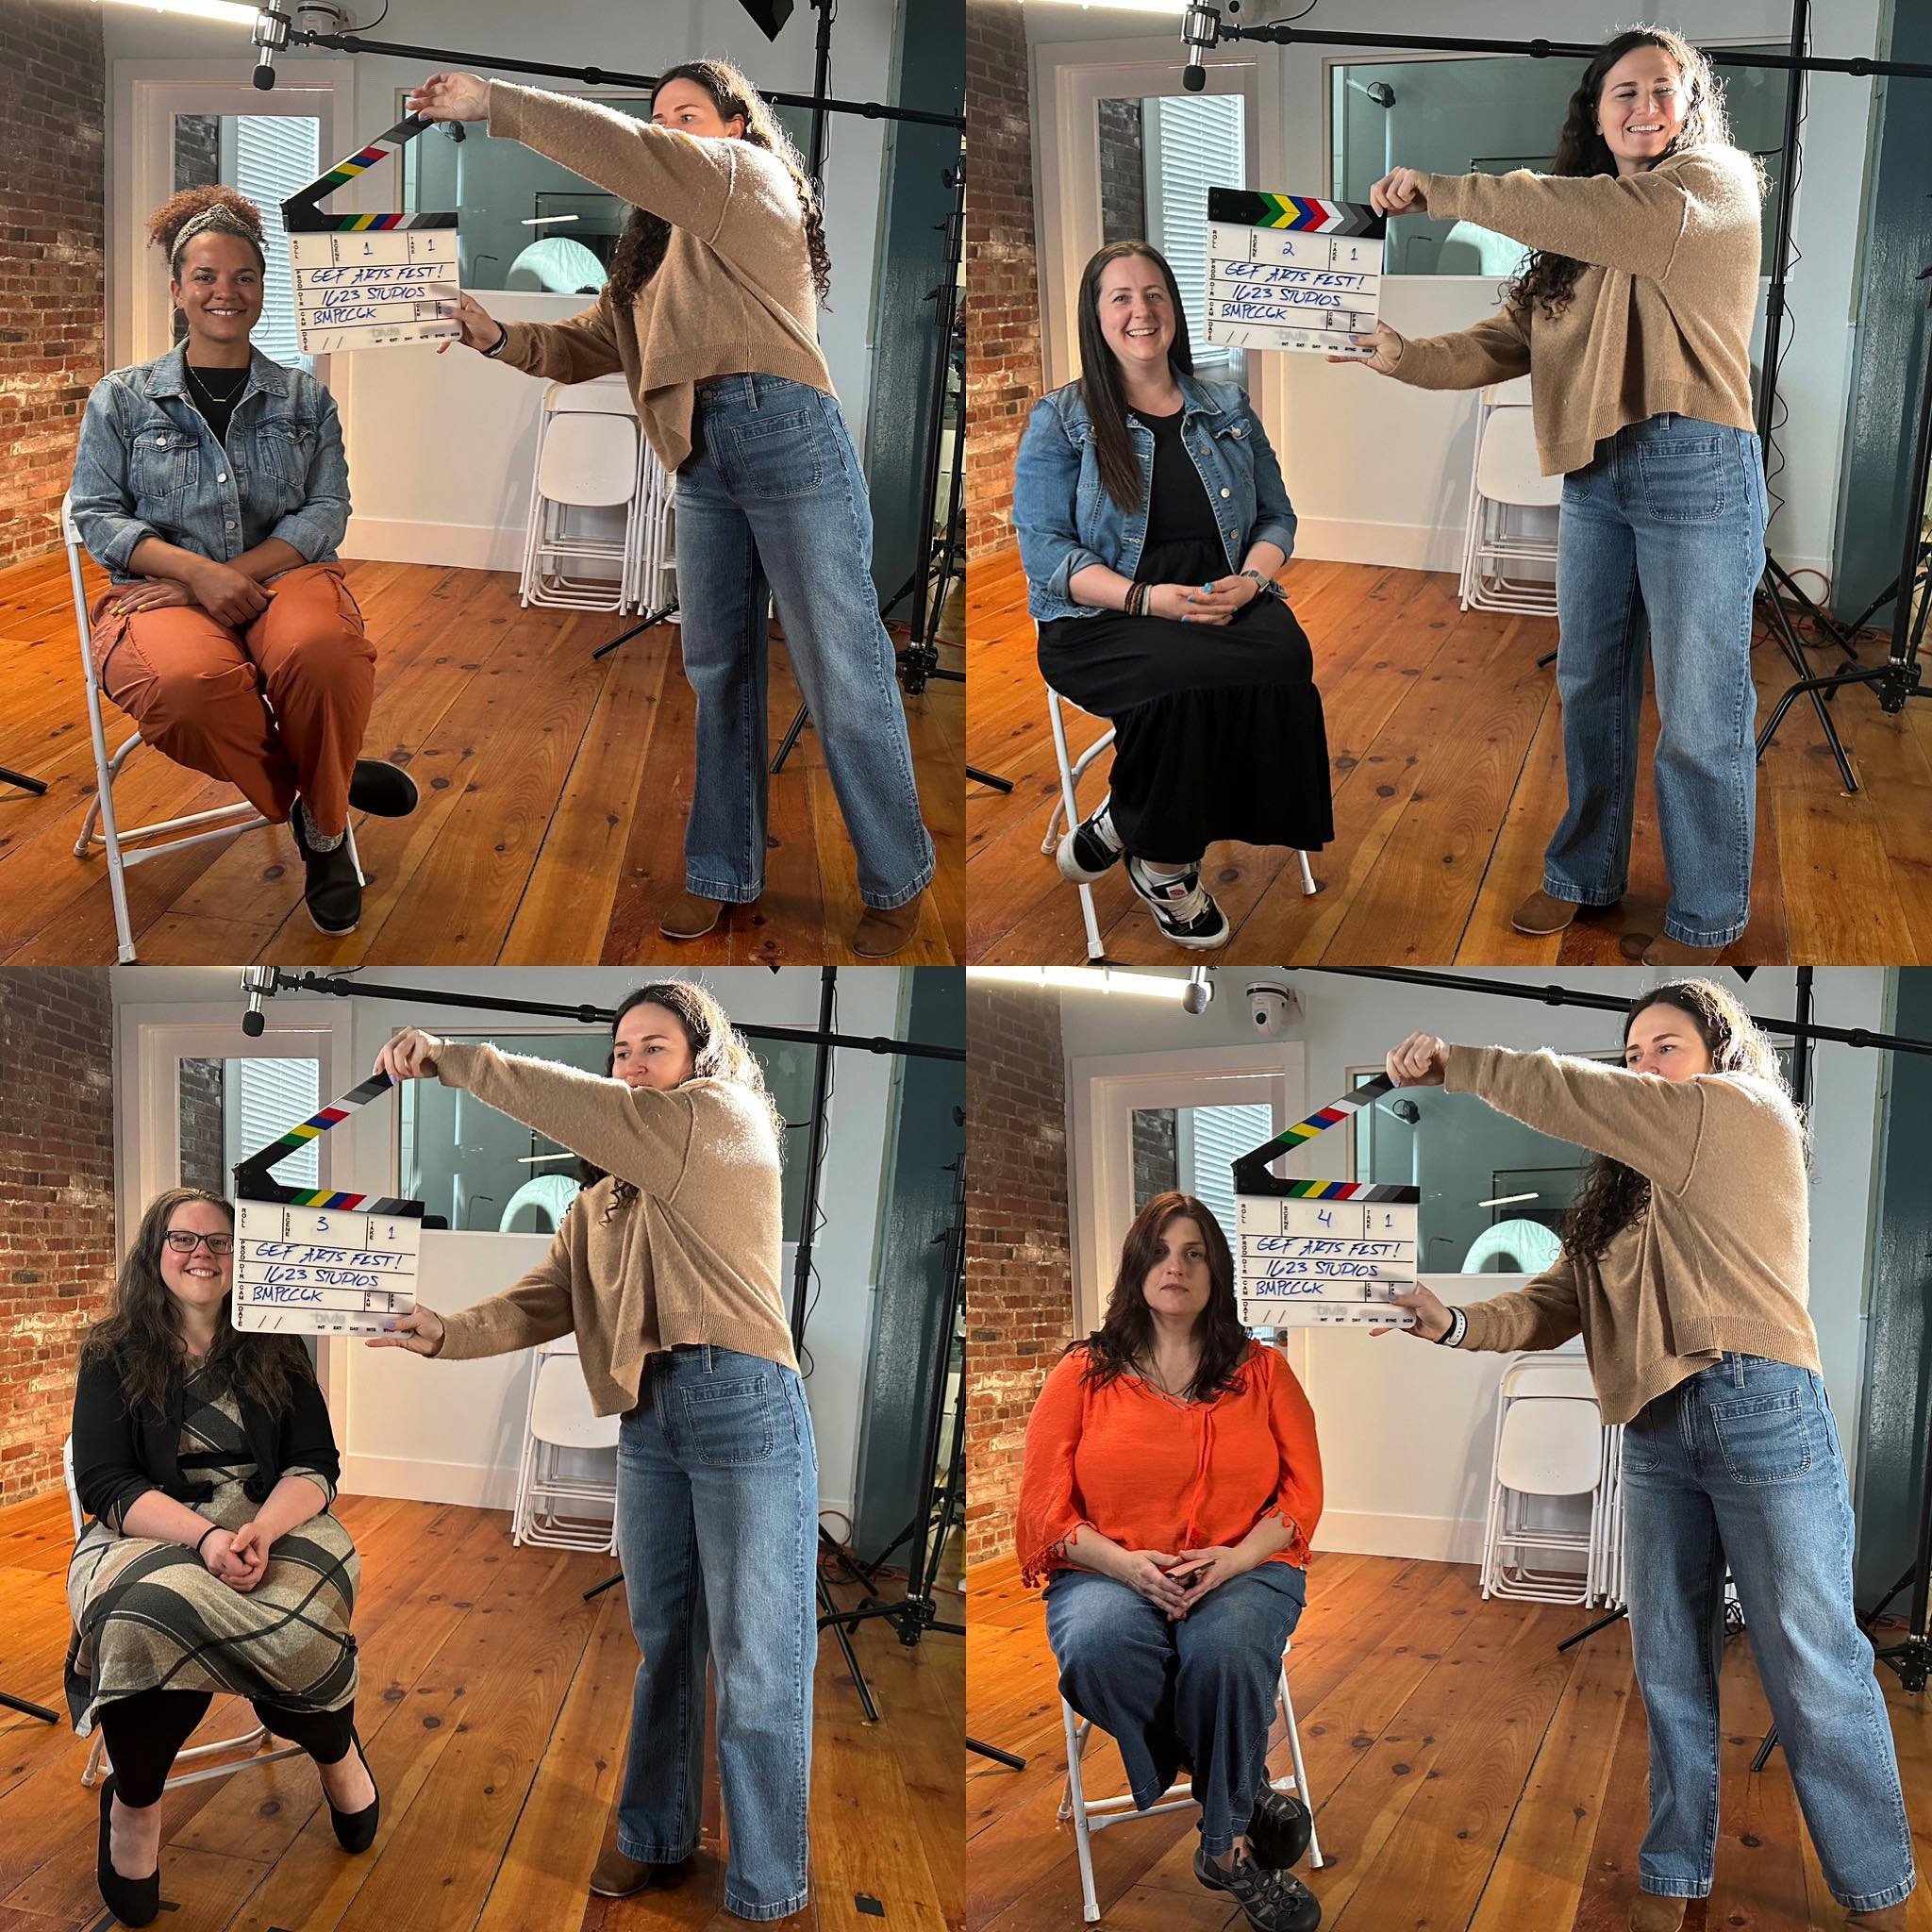 Lights, camera, ACTION! 🎬 🎥 🌟 

Wrapping up the week with an Arts Fest promo shoot with planning team members Toni, Jamie, Lauren and Christen. Their excitement about the event is infectious! Be on the lookout for this promo from our friends at @1